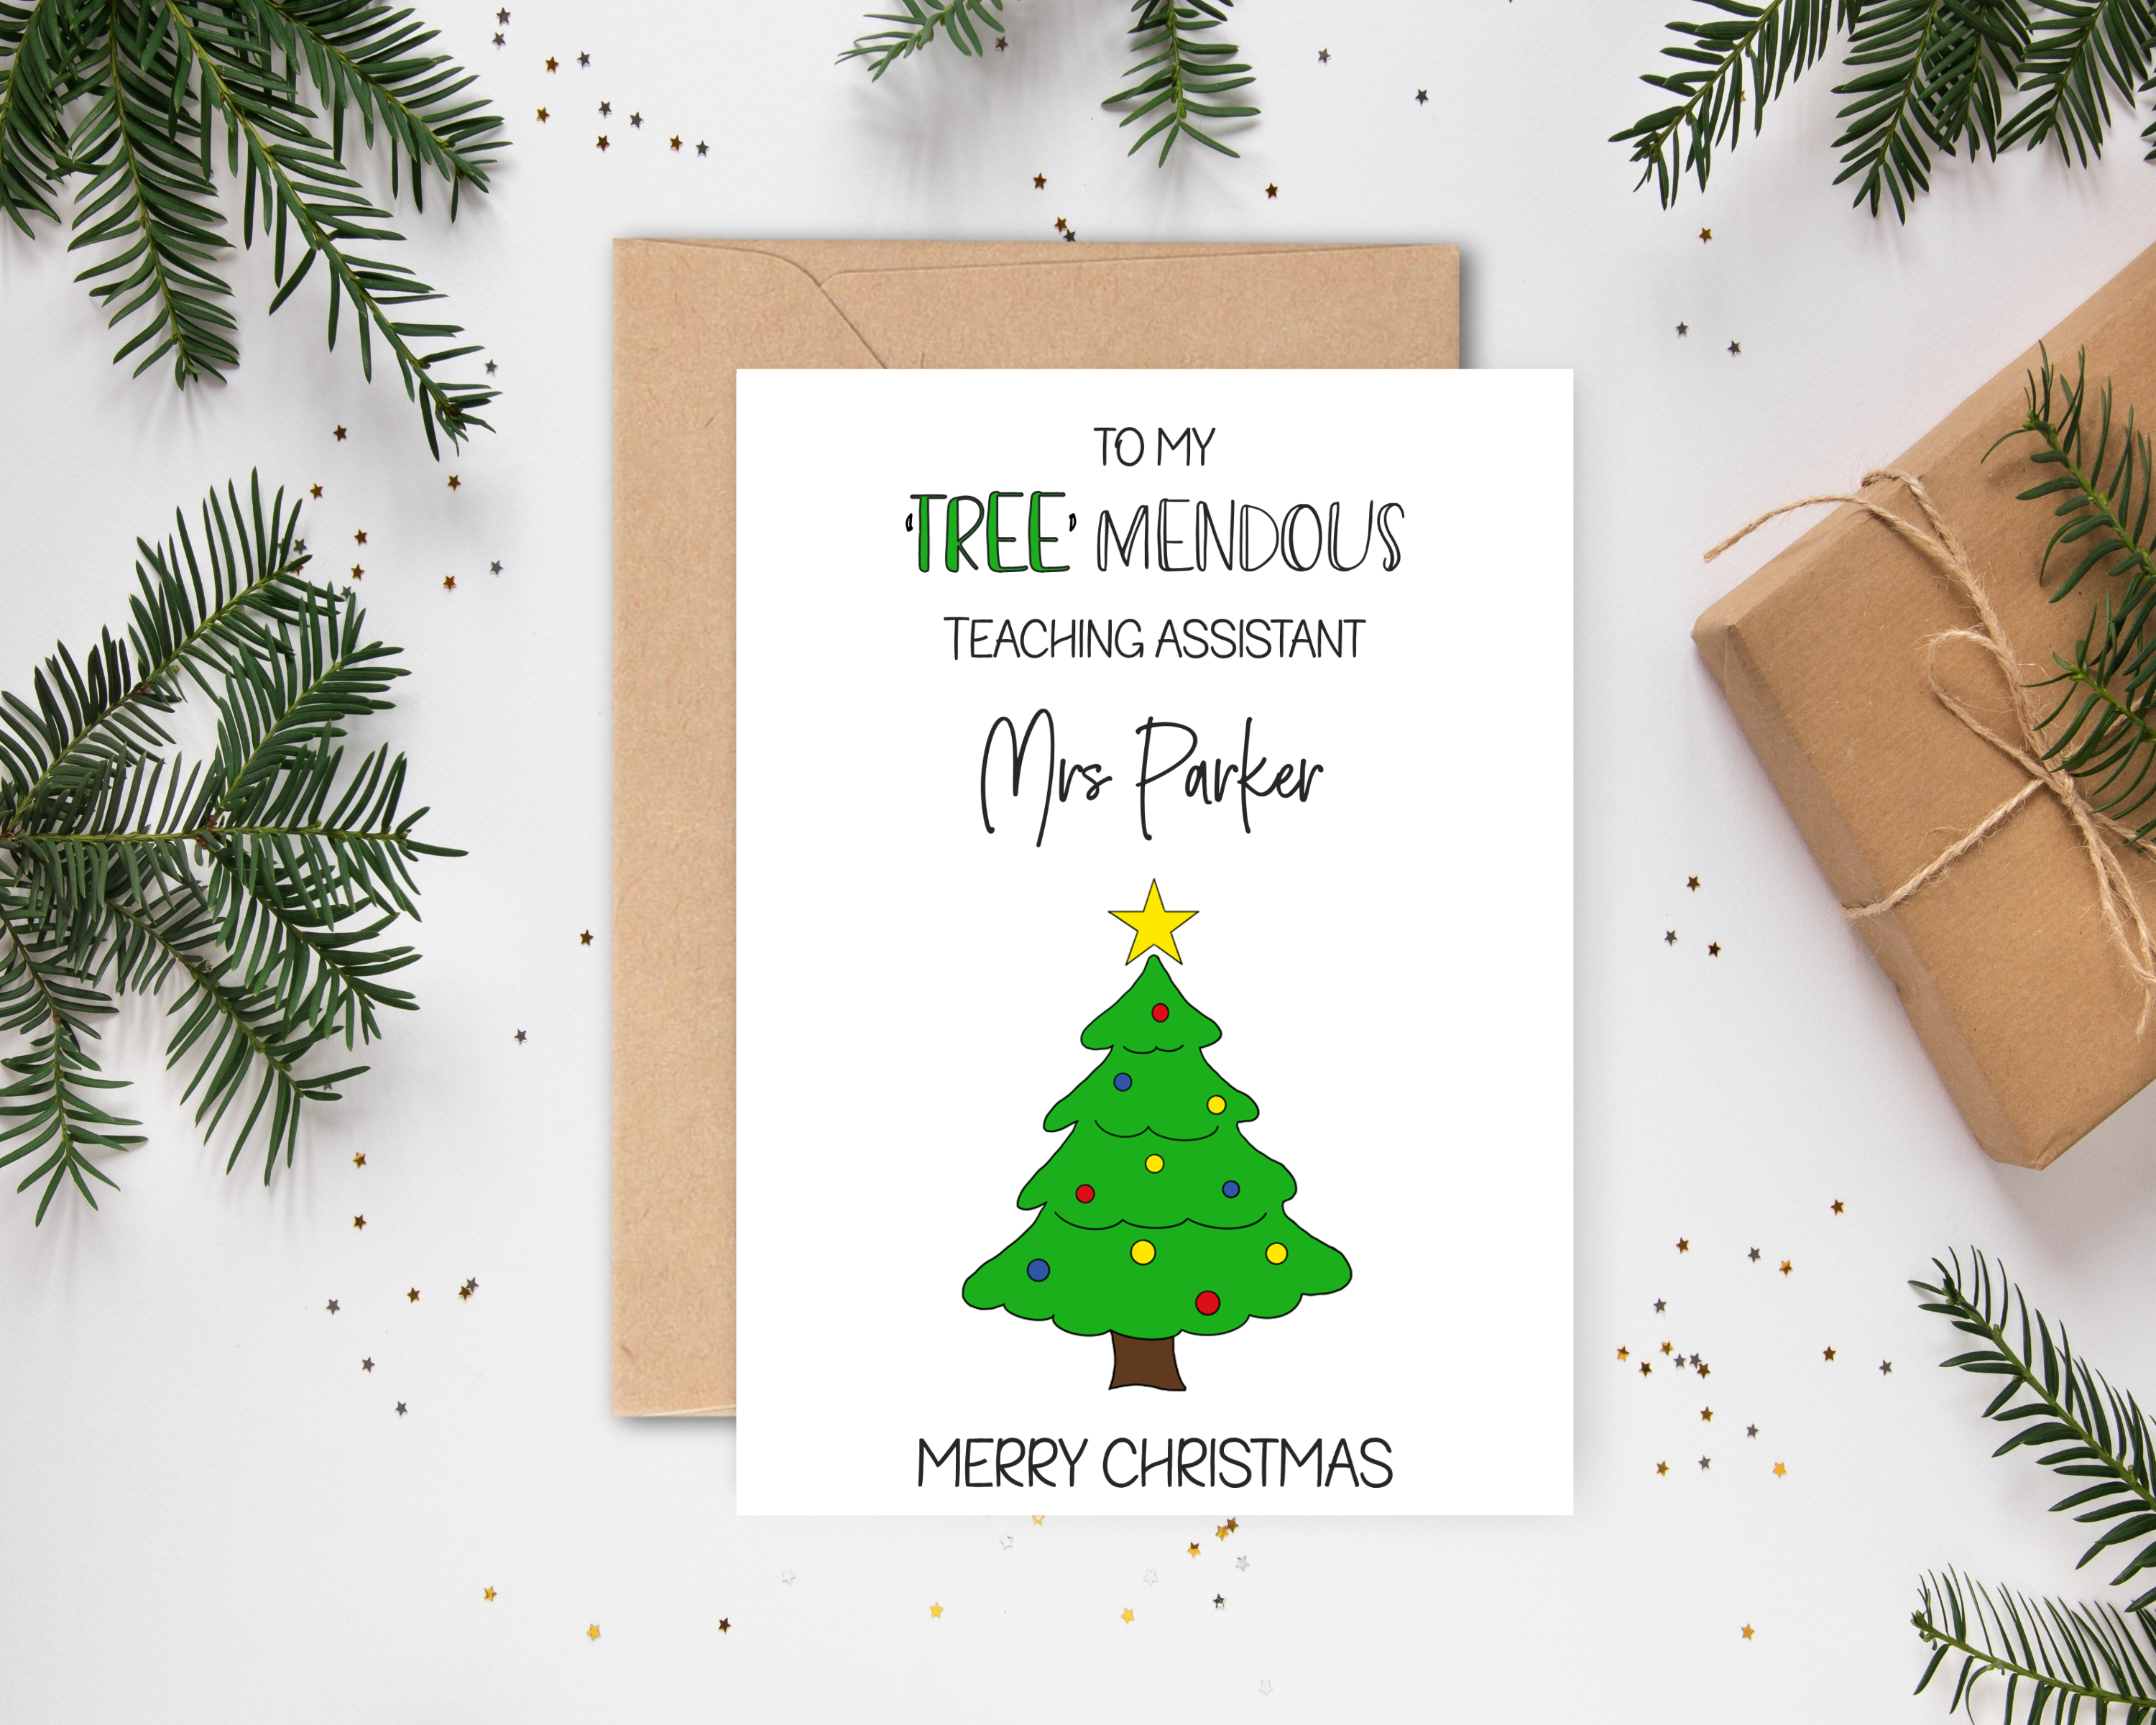 Poppleberry A6 'Tree-mendous' Personalised & Glittered Teaching Assistant Christmas Card on White Cardstock and Kraft brown Envelope.